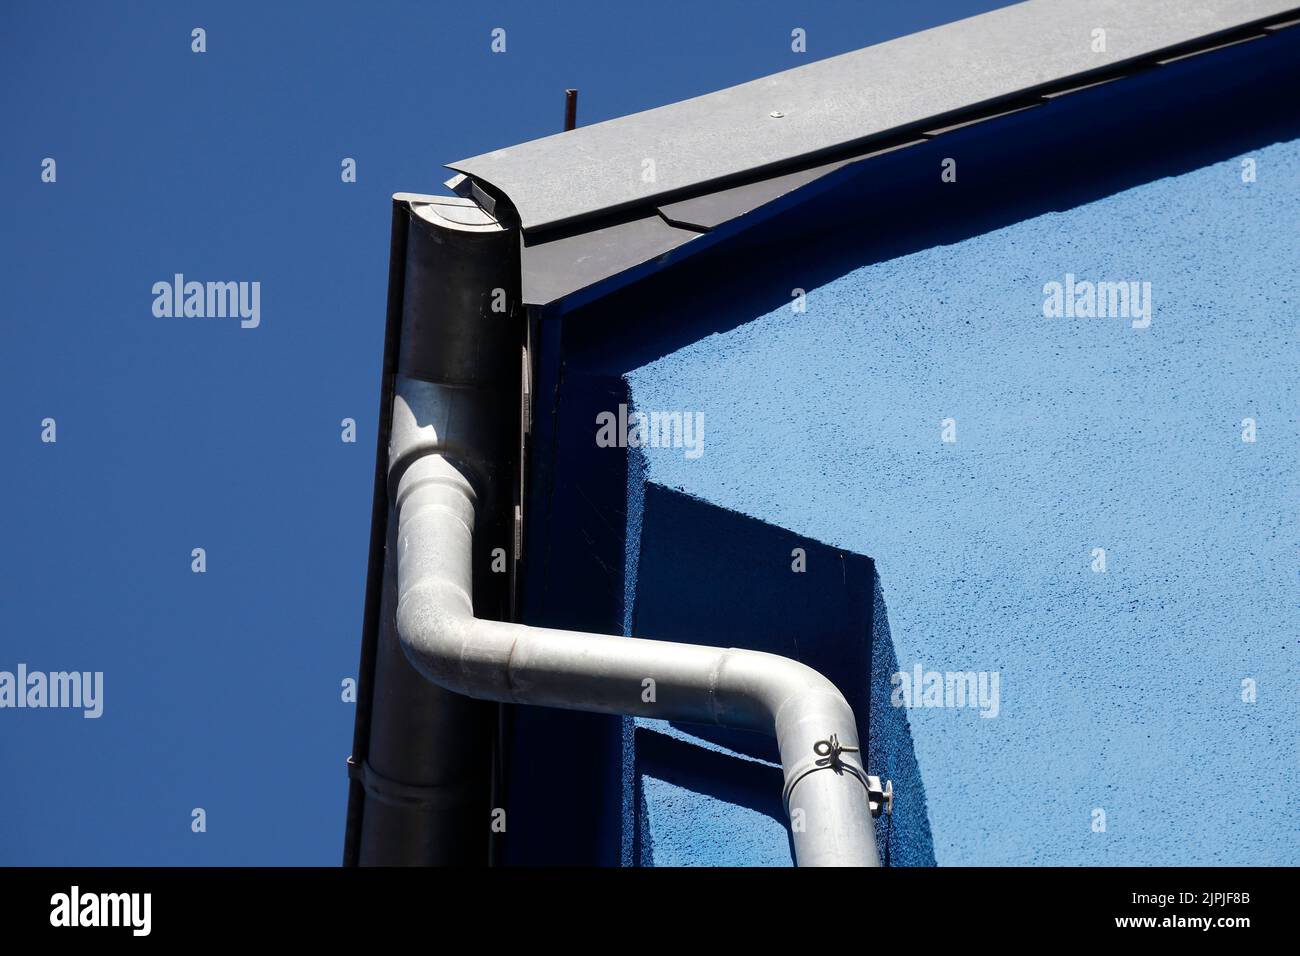 rain gutter, water pipe, drain pipe, rain gutters, water pipes, drain pipes, sewer Stock Photo